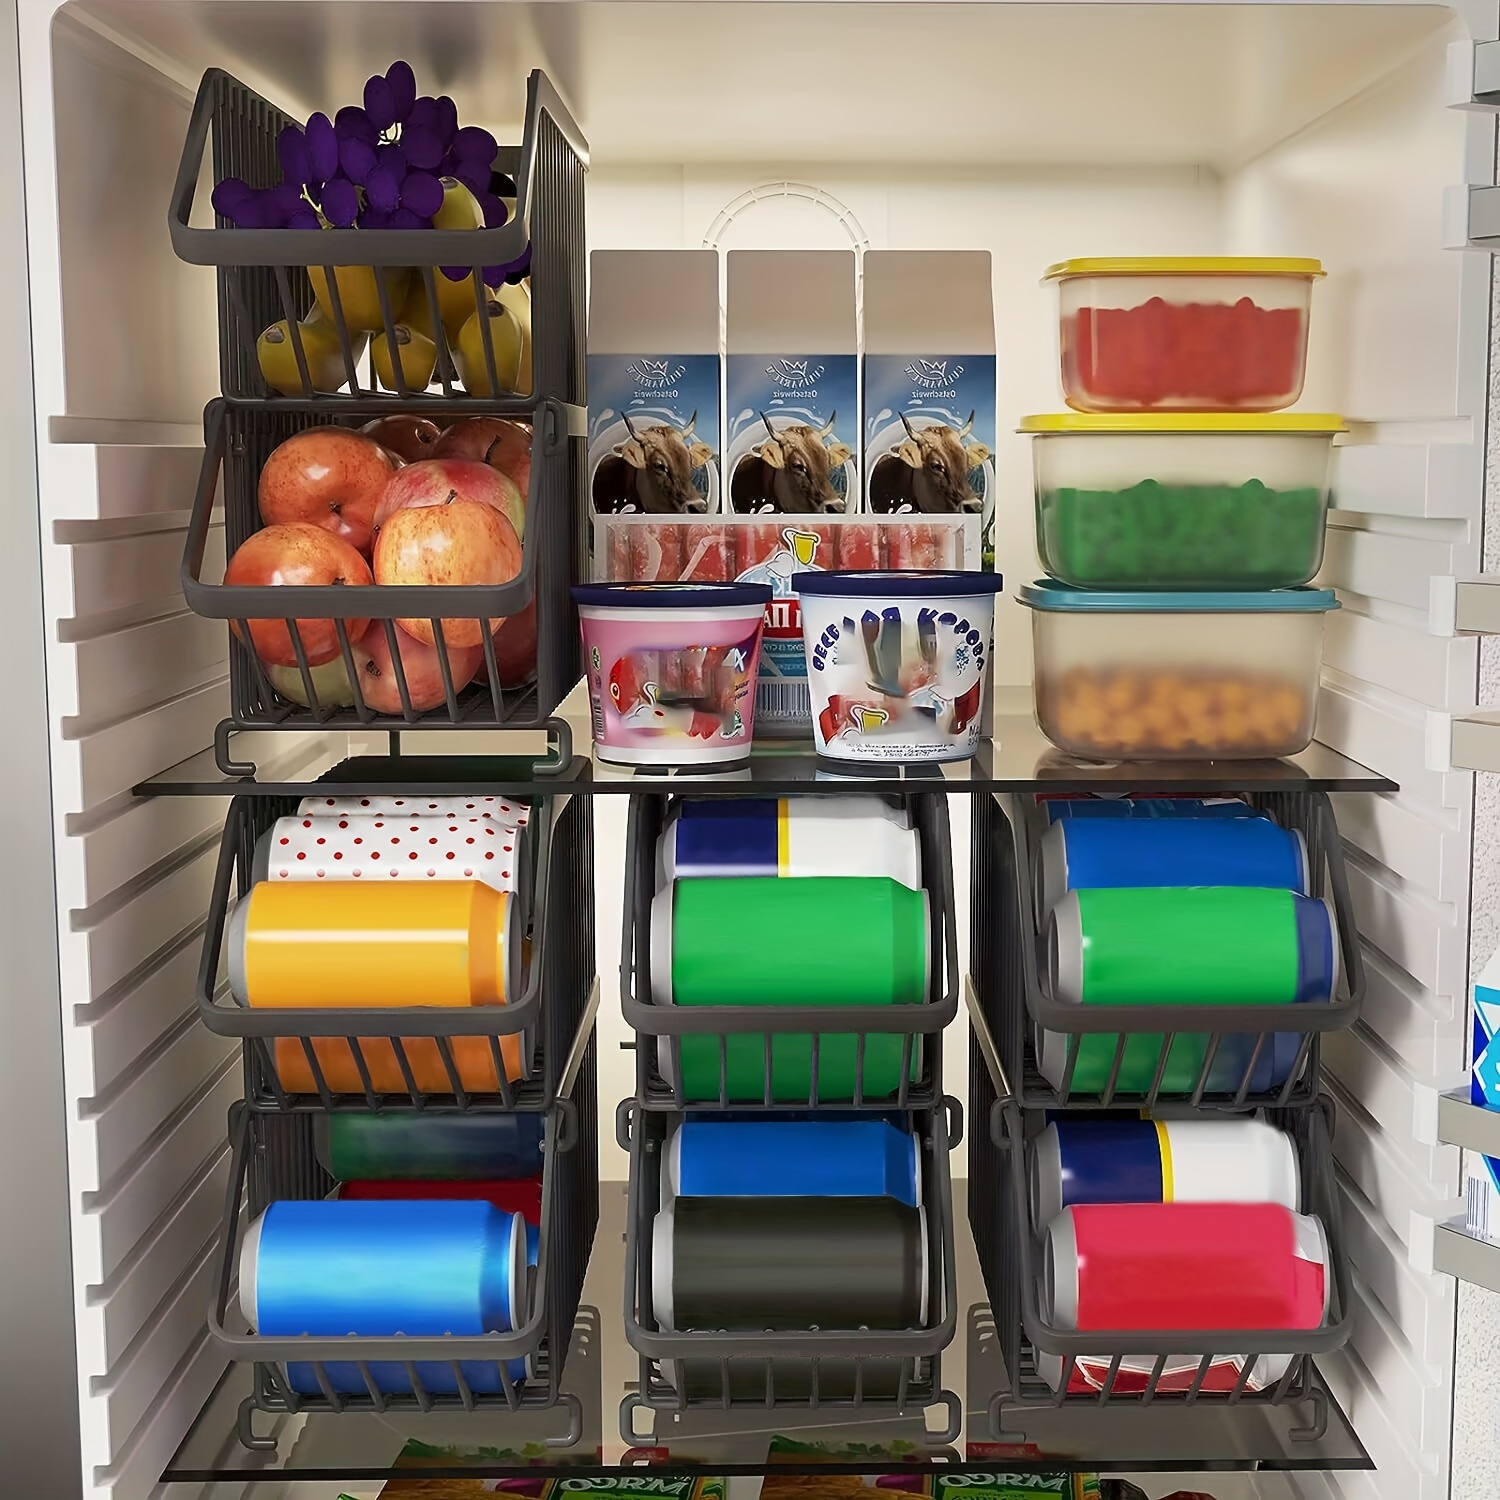 Can Rack Organizer,Stackable Pantry Organizer Can Storage